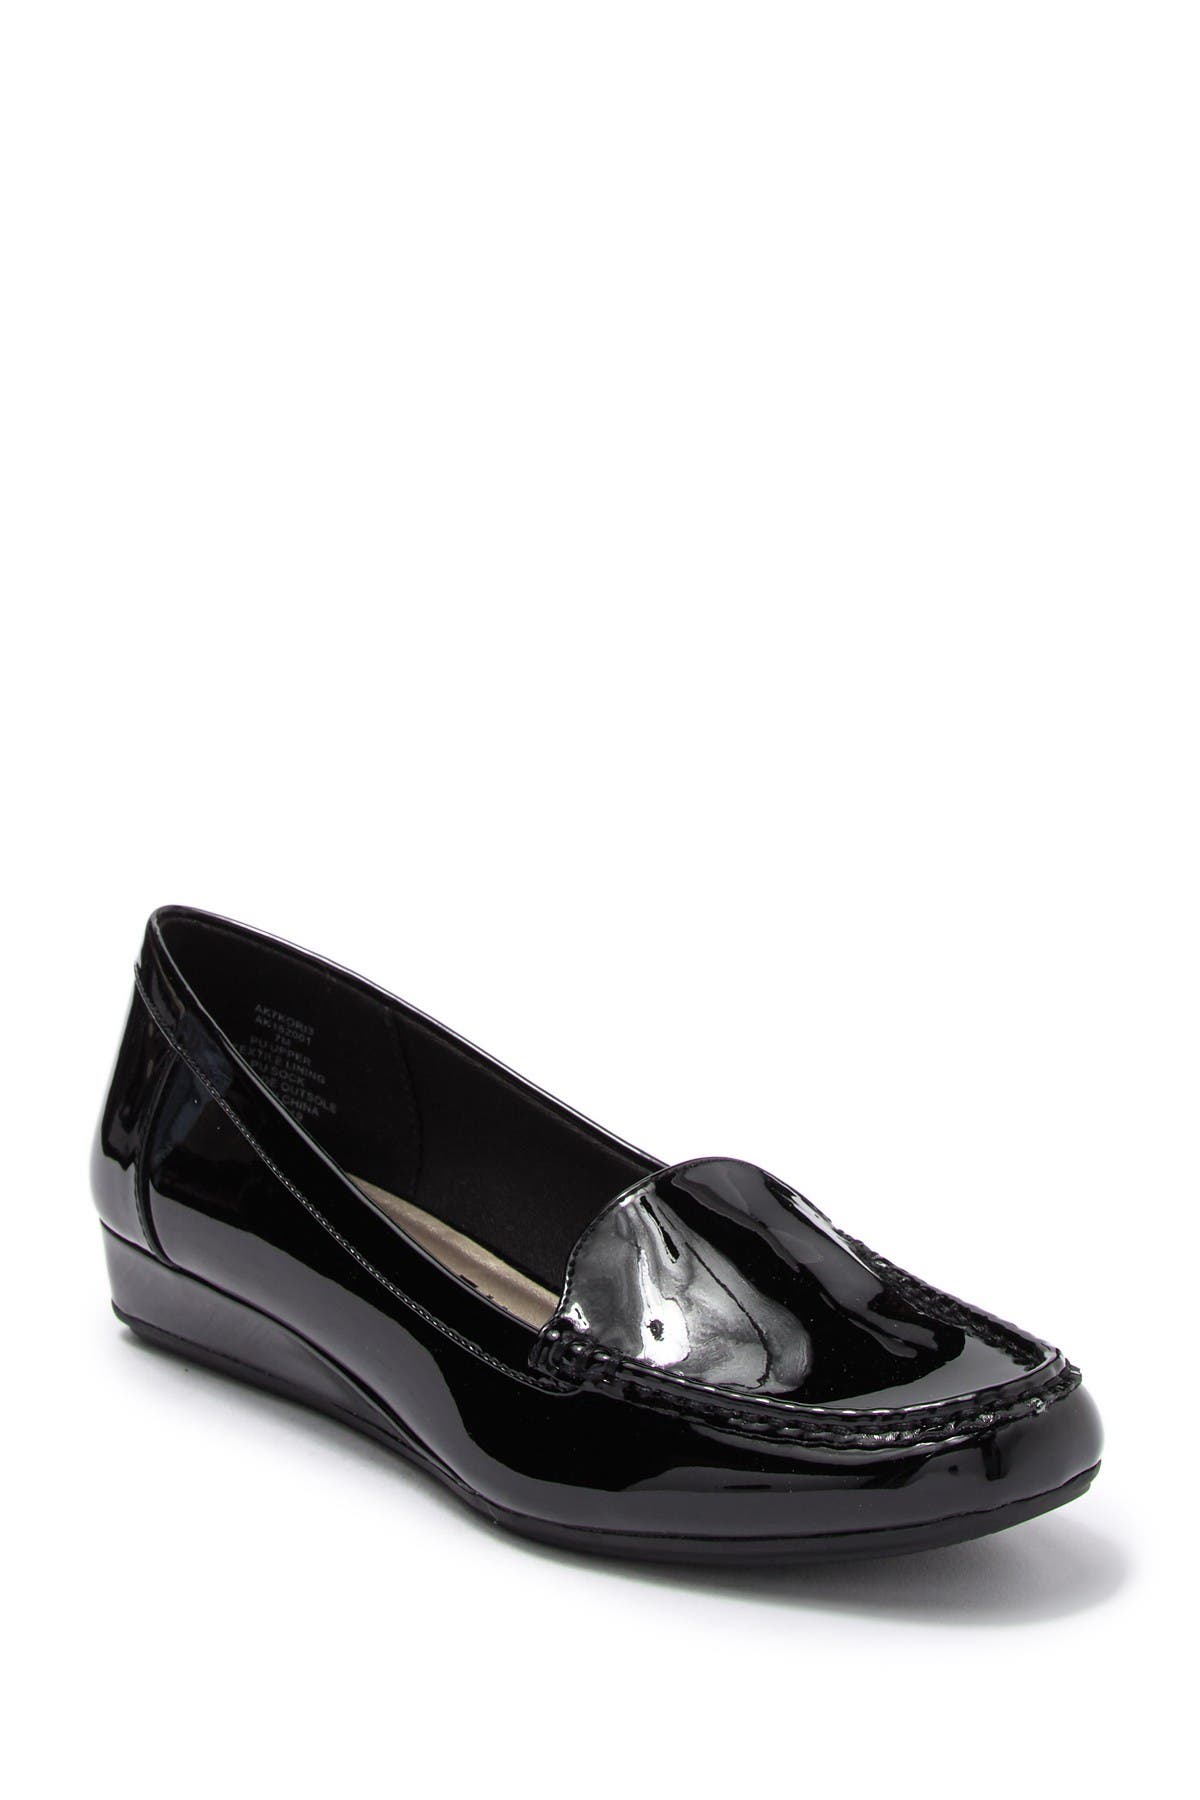 anne klein black patent leather loafers